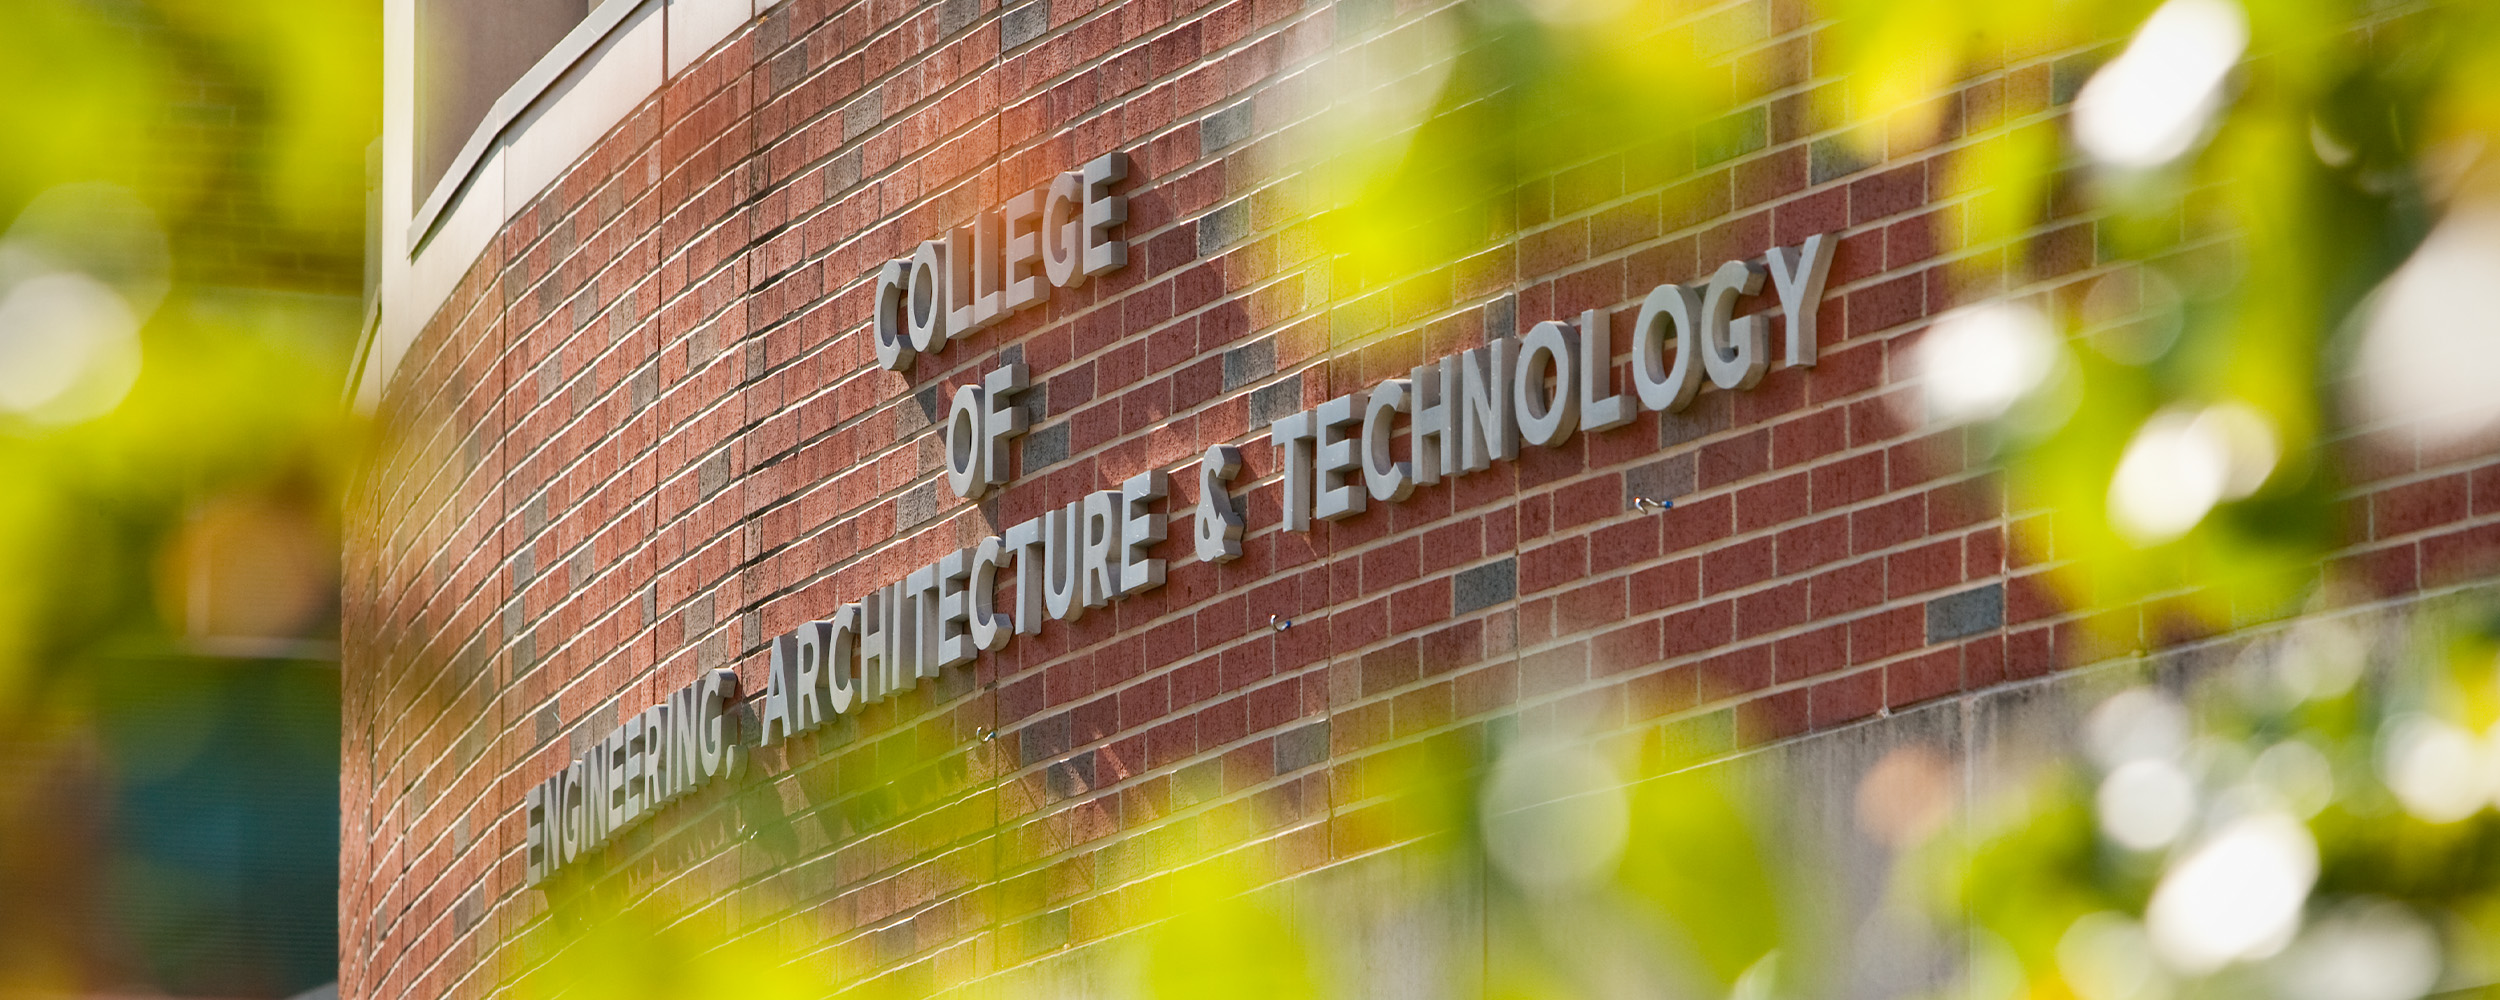 Photo of College of Engineering, Architecture and Technology signage.